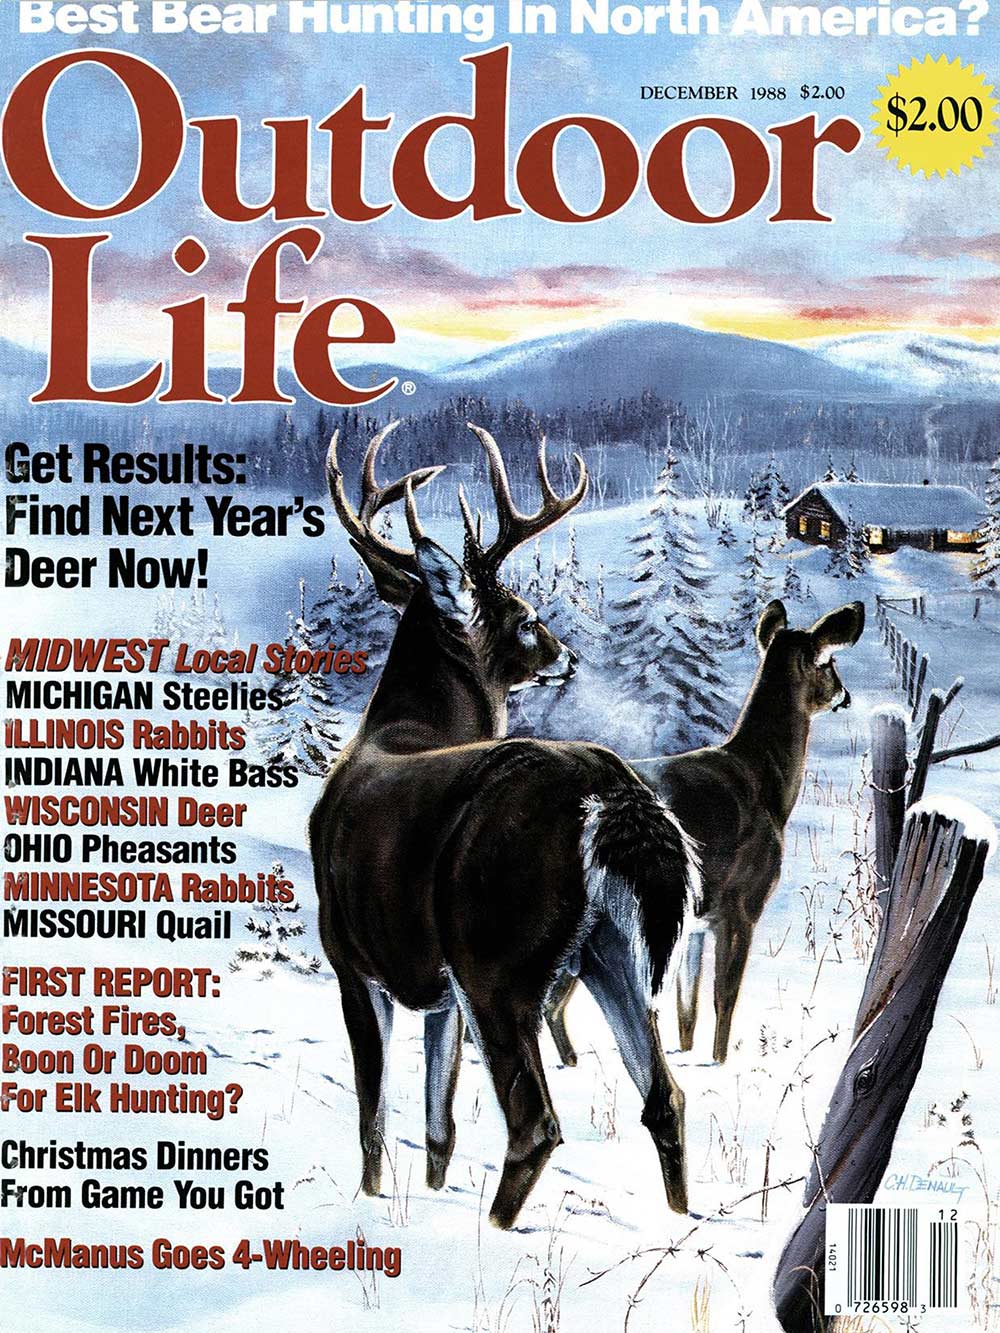 December 1988 Cover of Outdoor Life